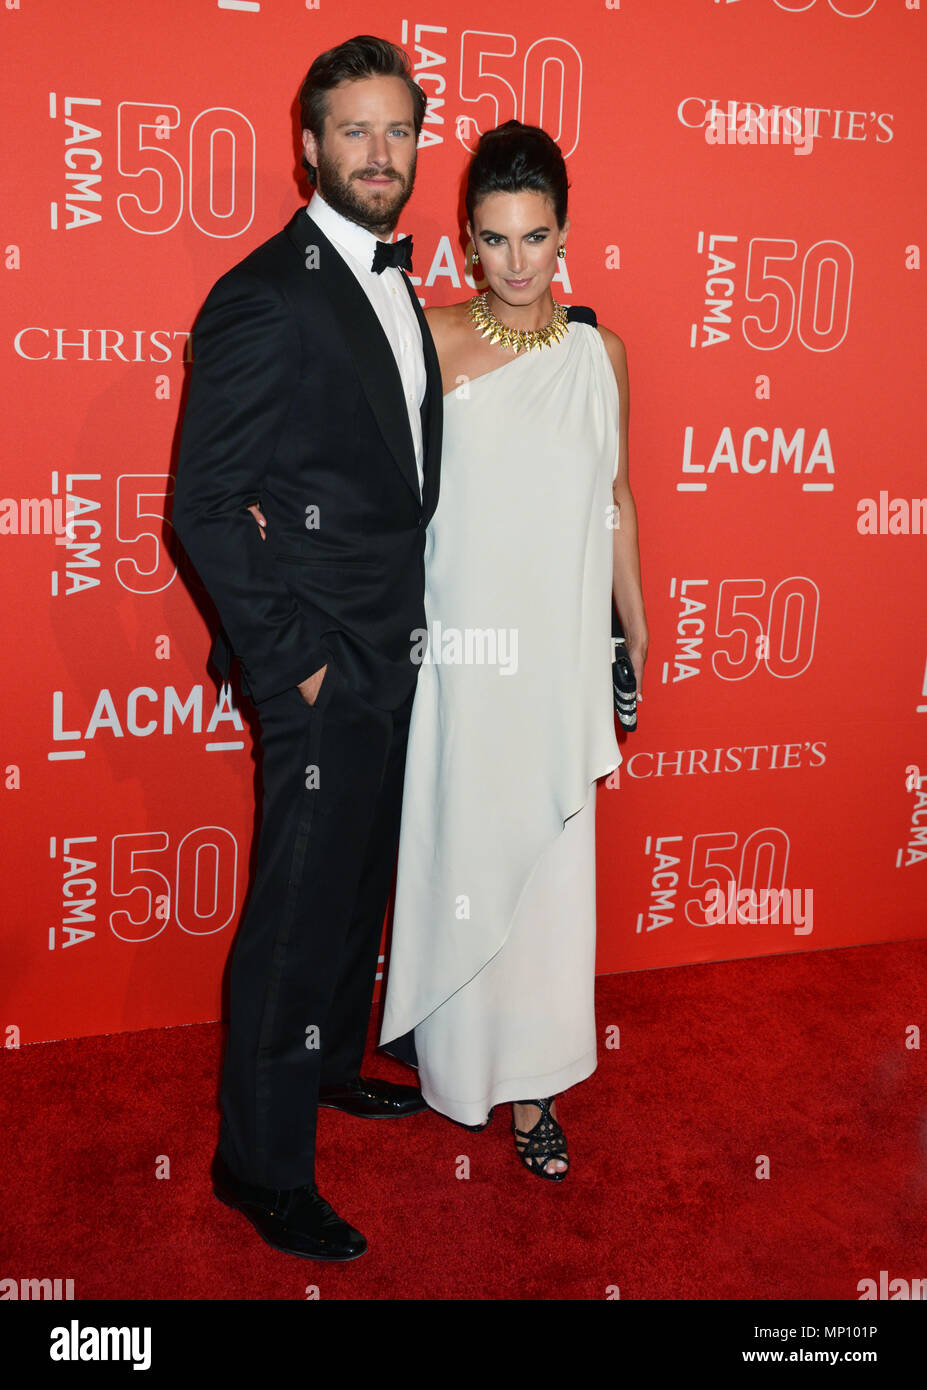 Armie Hammer and Wife Elizabeth Chambers 051 at the  LACMA 50th Ann. Gala 2015 at the LACMA Museum in Los Angeles. April 18, 2015.Armie Hammer and Wife Elizabeth Chambers 051 ------------- Red Carpet Event, Vertical, USA, Film Industry, Celebrities,  Photography, Bestof, Arts Culture and Entertainment, Topix Celebrities fashion /  Vertical, Best of, Event in Hollywood Life - California,  Red Carpet and backstage, USA, Film Industry, Celebrities,  movie celebrities, TV celebrities, Music celebrities, Photography, Bestof, Arts Culture and Entertainment,  Topix, vertical,  family from from the ye Stock Photo